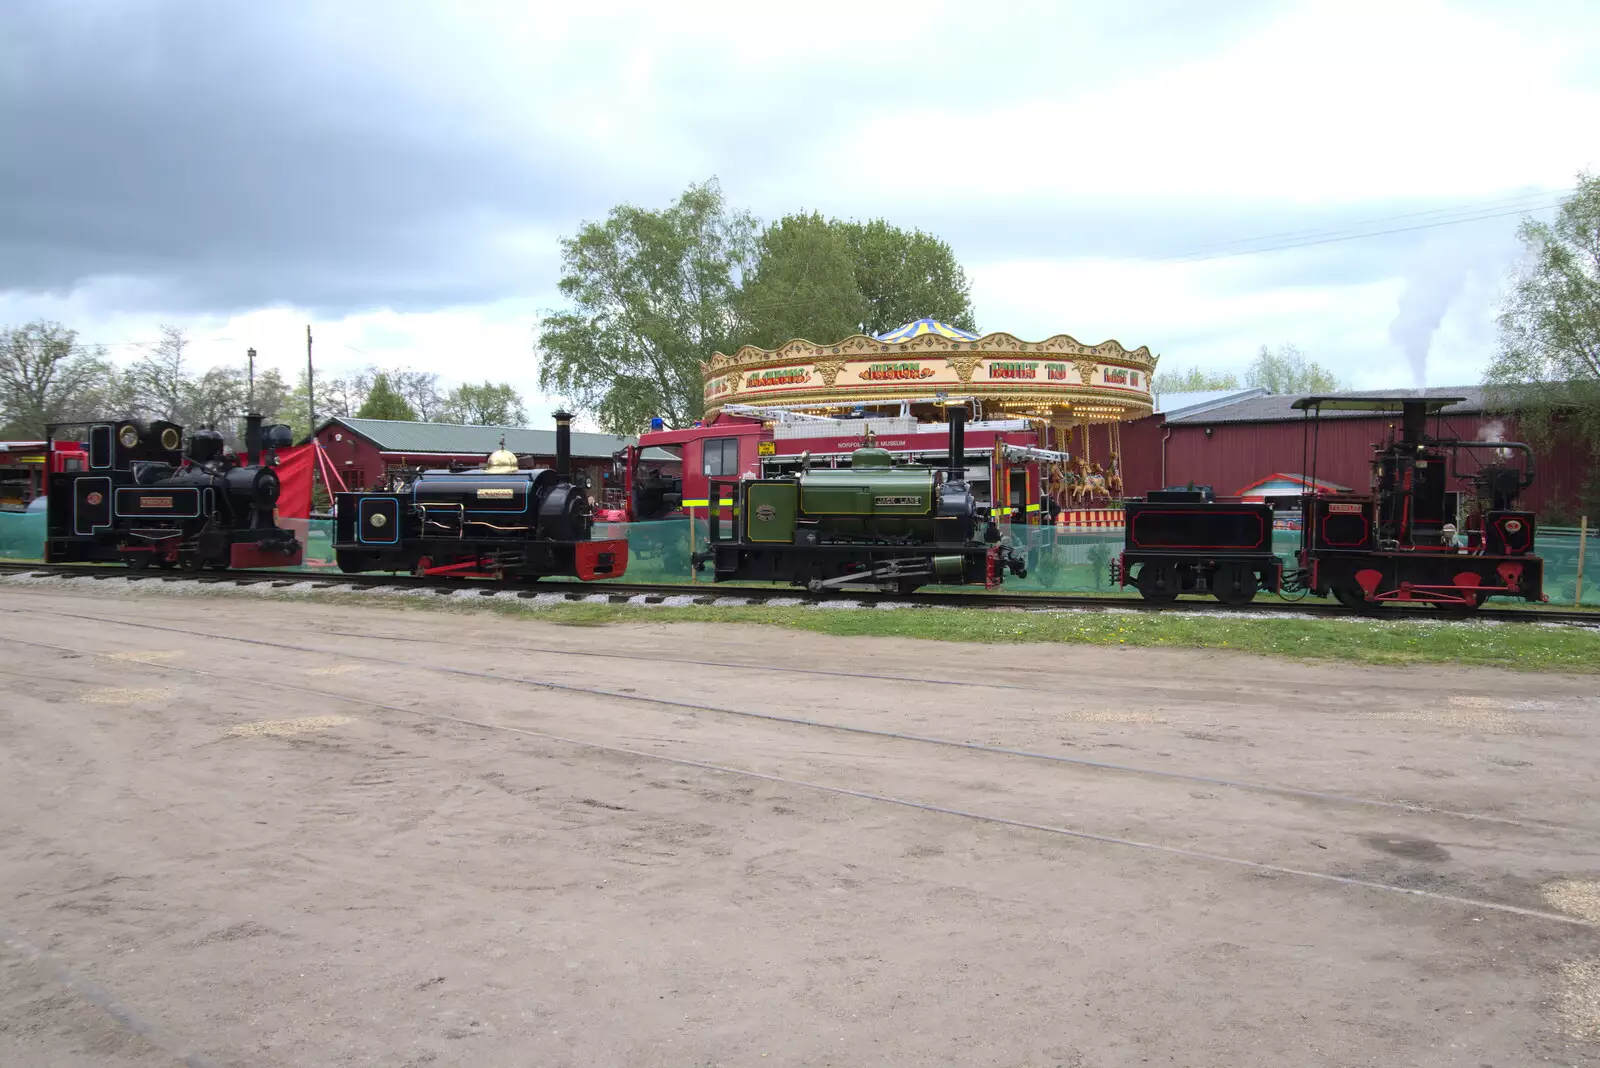 All four narrow-guage engines are lined up, from The Heritage Steam Gala, Bressingham Steam Museum, Norfolk - 1st May 2023